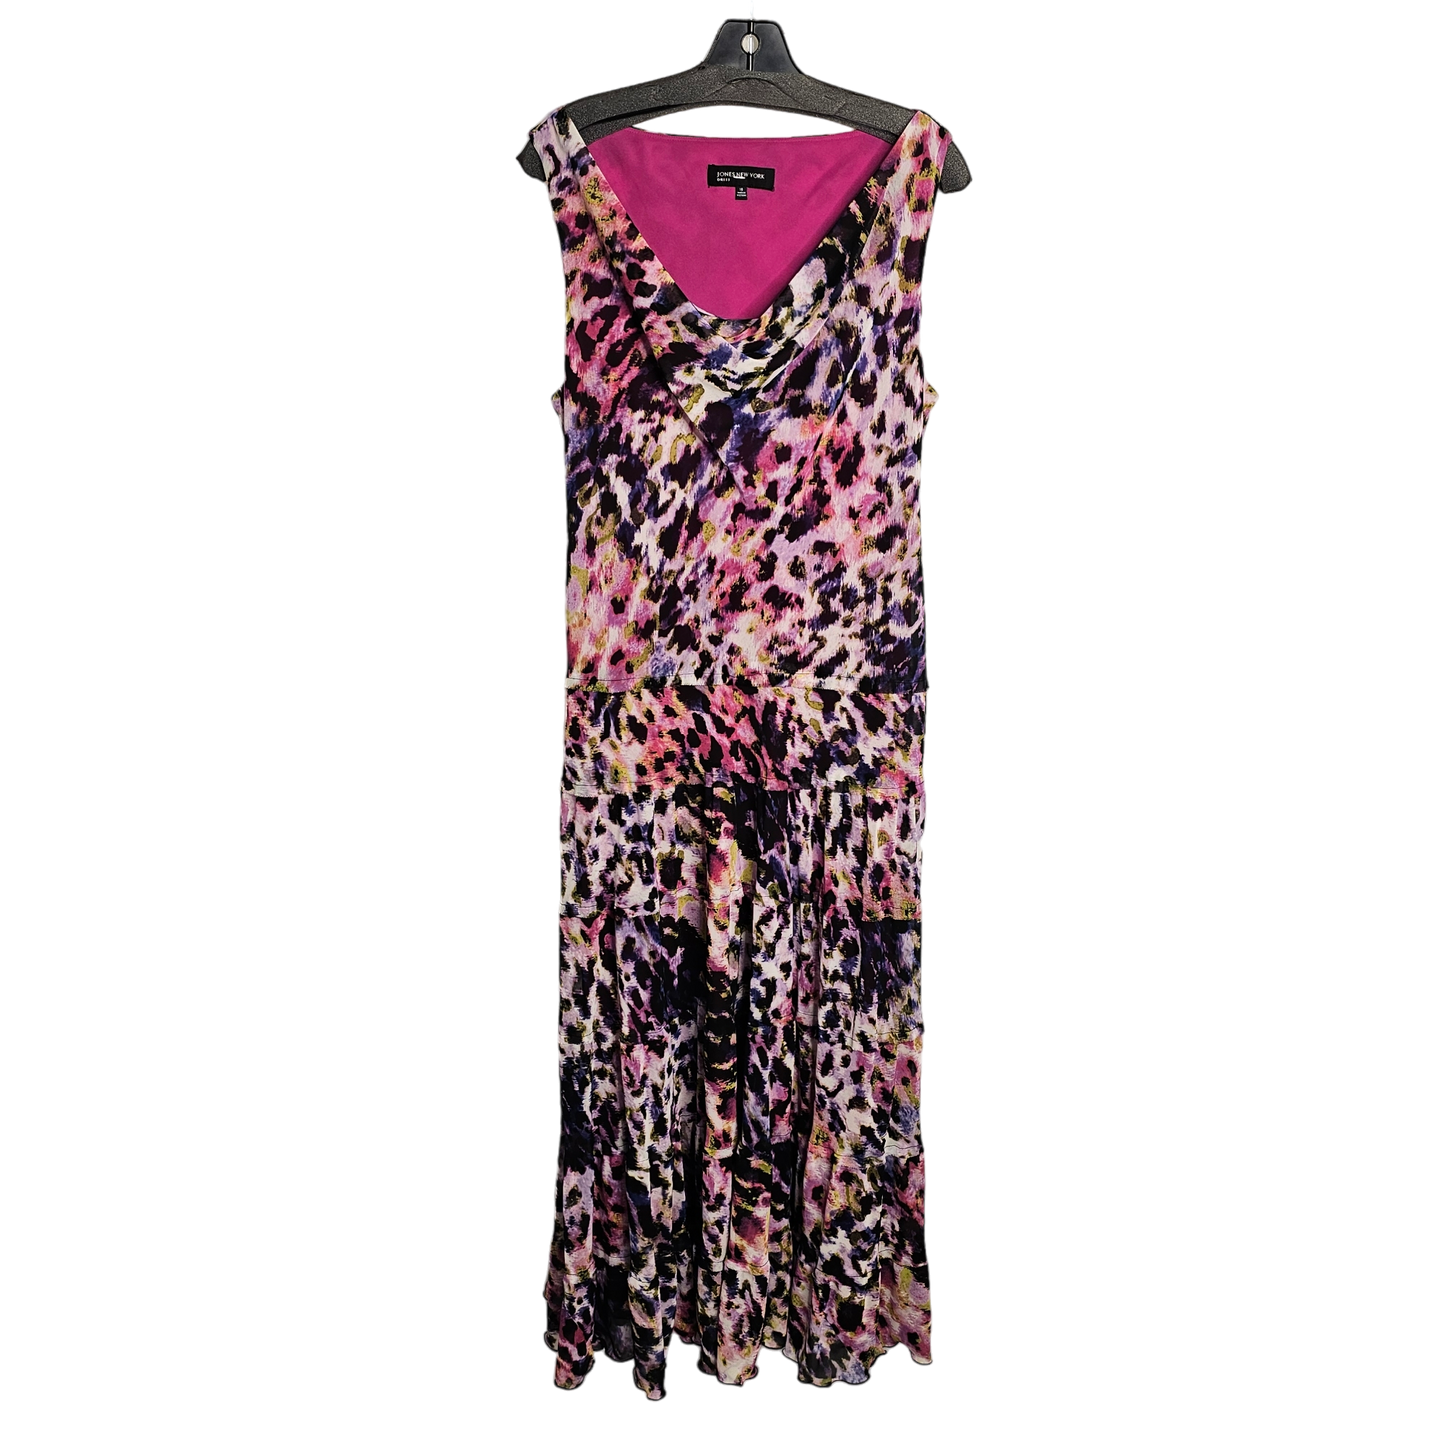 Dress Party Long By Jones New York  Size: 16